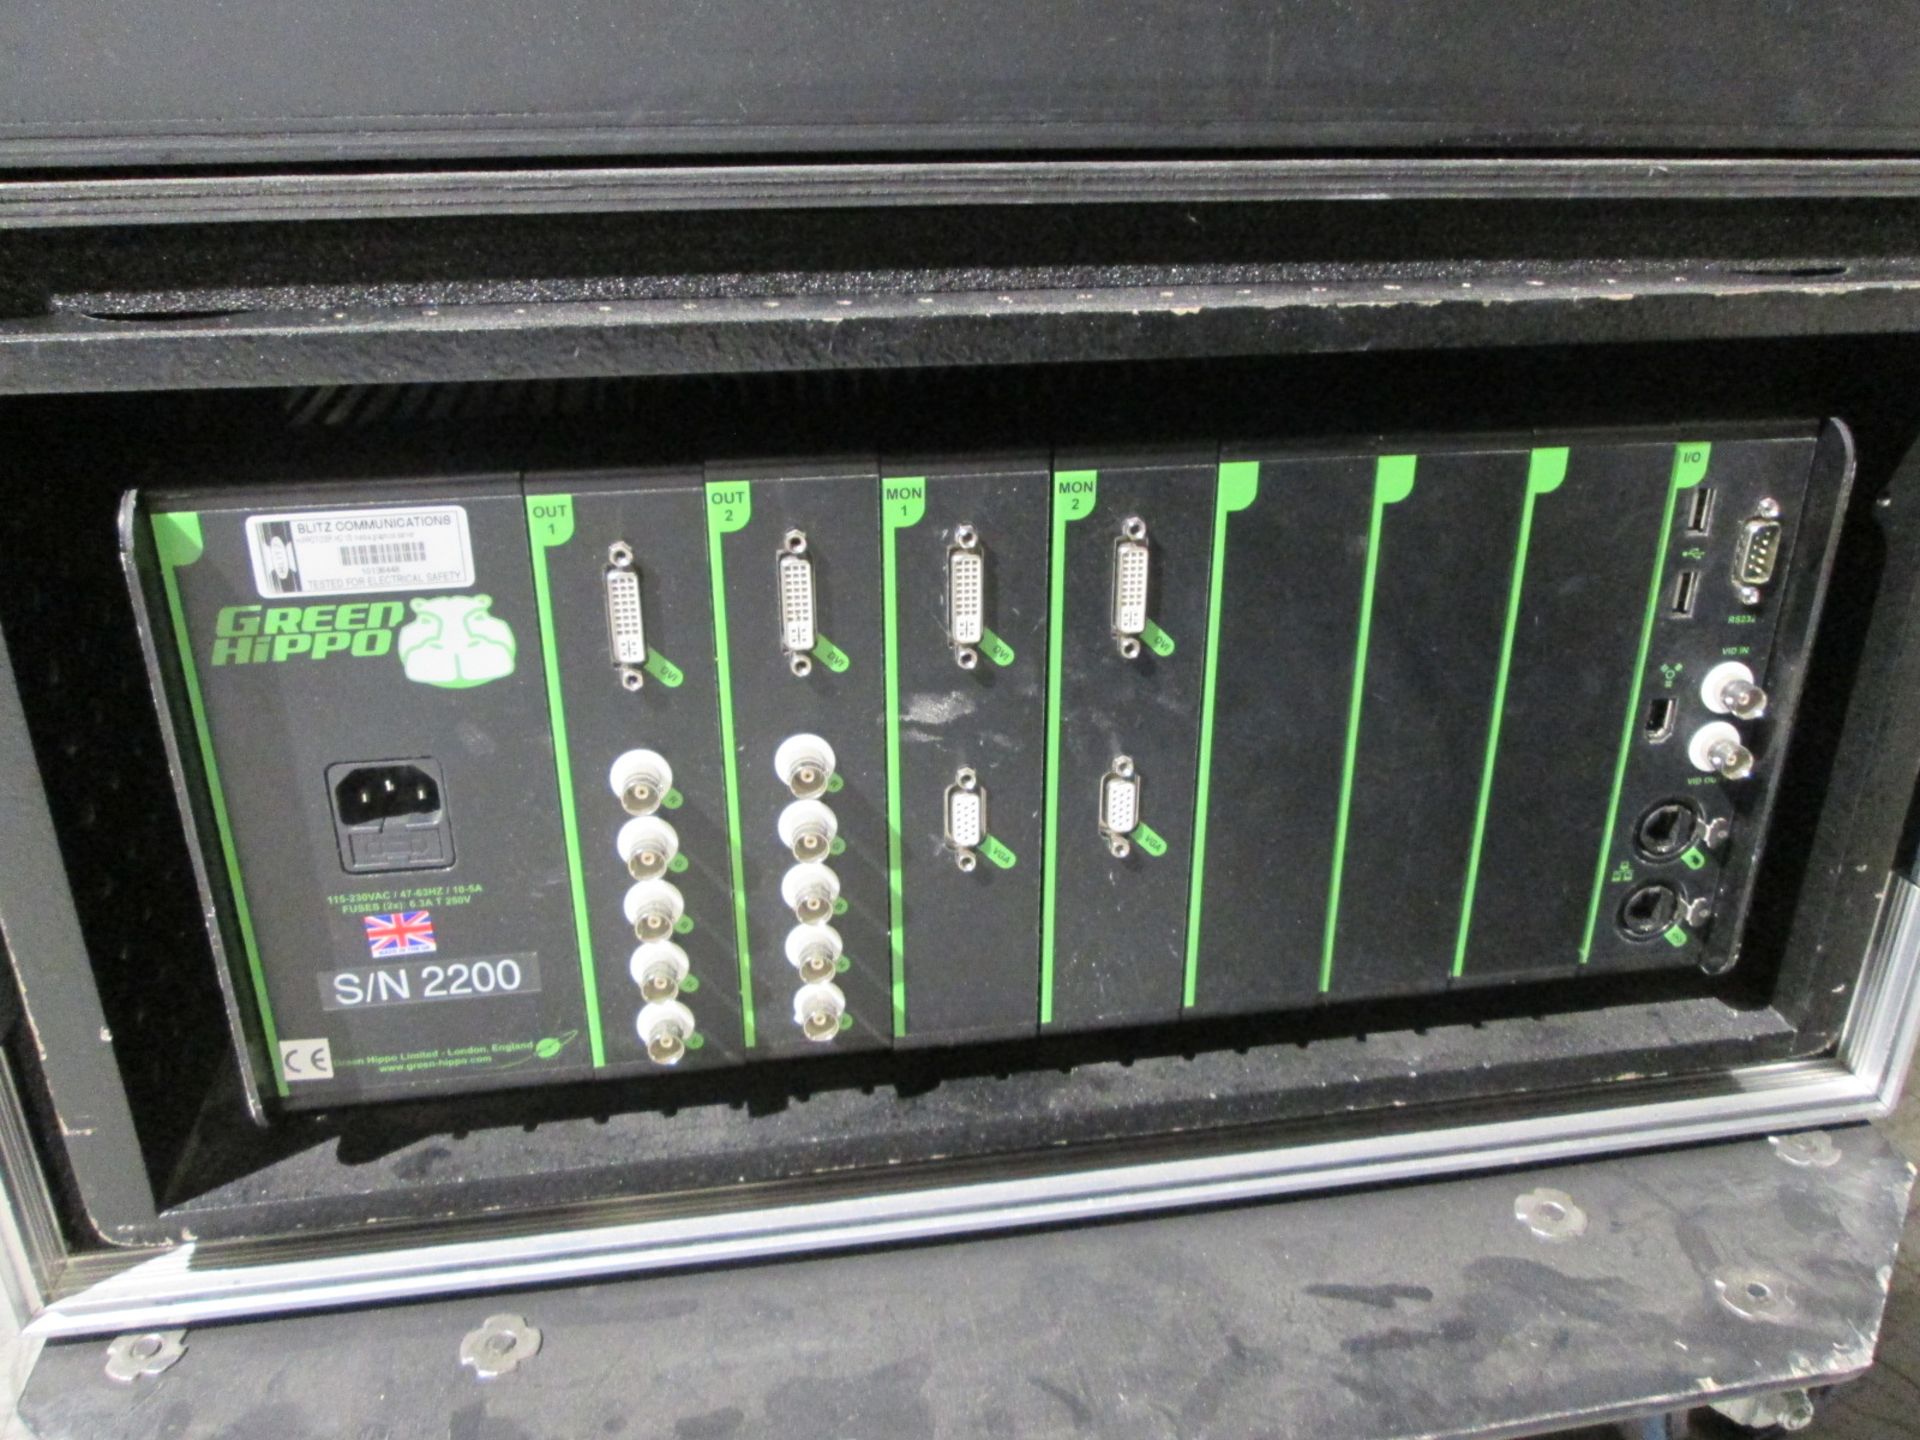 Green Hippo V5 Hippotiser Media Graphics Server with fader remote panel. S/N 2200. In flight case - Image 6 of 9